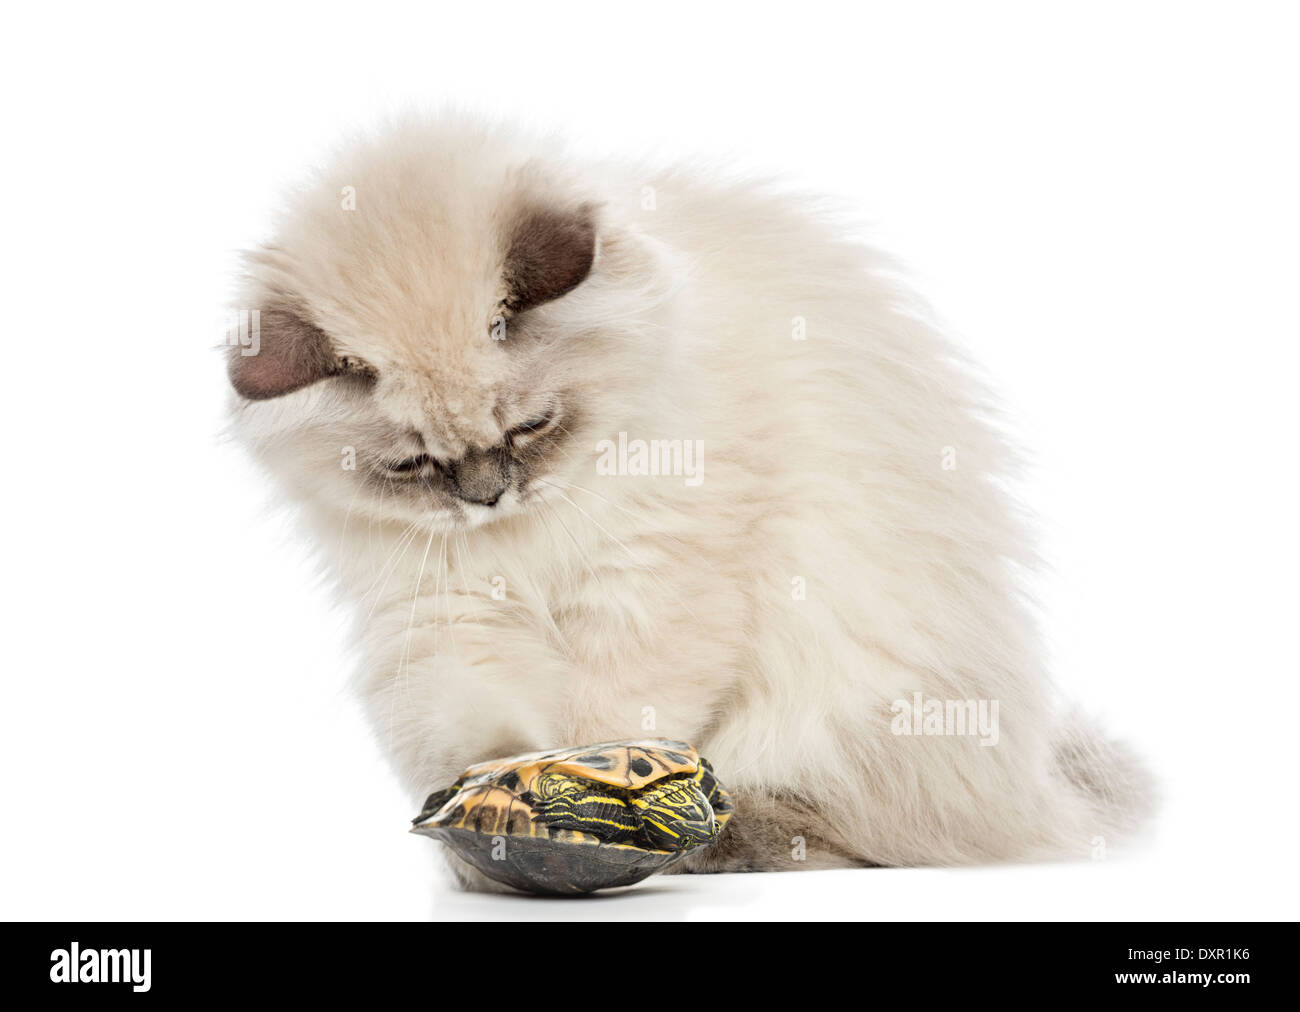 British Longhair kitten playing with a pond slider turtle against white background Stock Photo